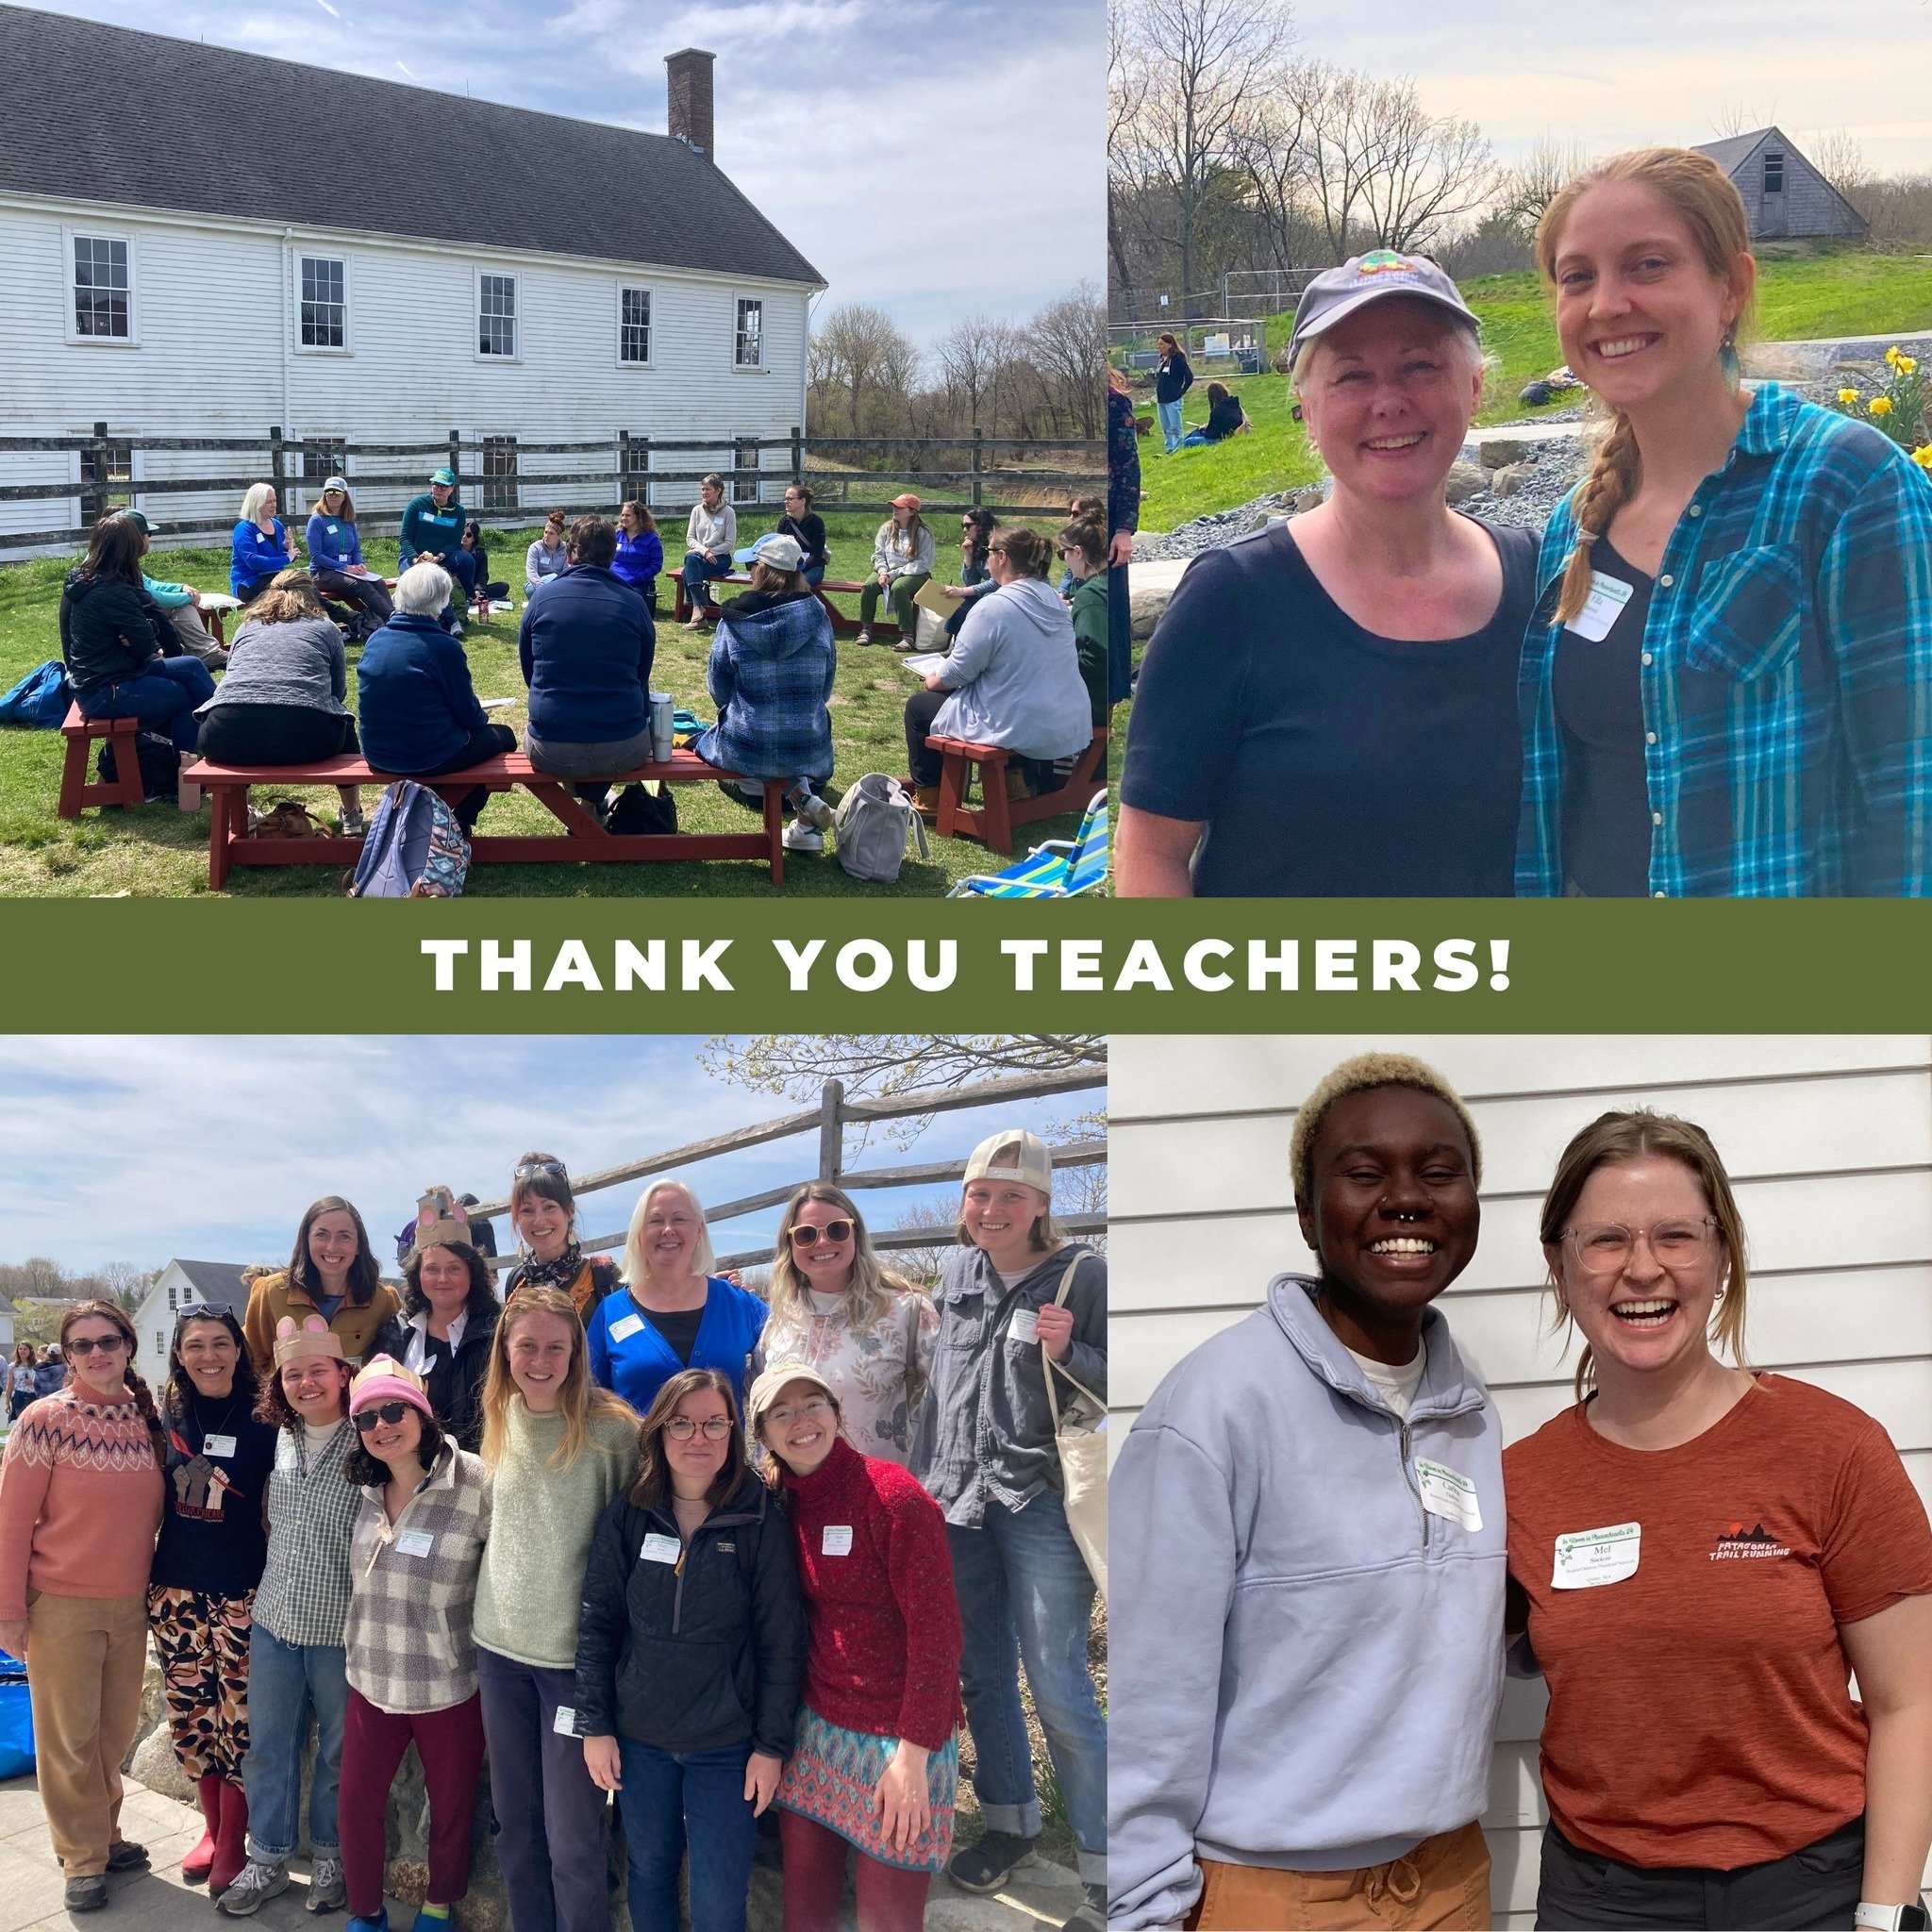 🍎 Happy National Teacher Day! 🌿 Please share your gratitude for BOPN teachers below!

Today, we celebrate our phenomenal teachers &mdash; Thank you for being the heart of our community; we would not be BOPN without you!  Your dedication to outdoor 